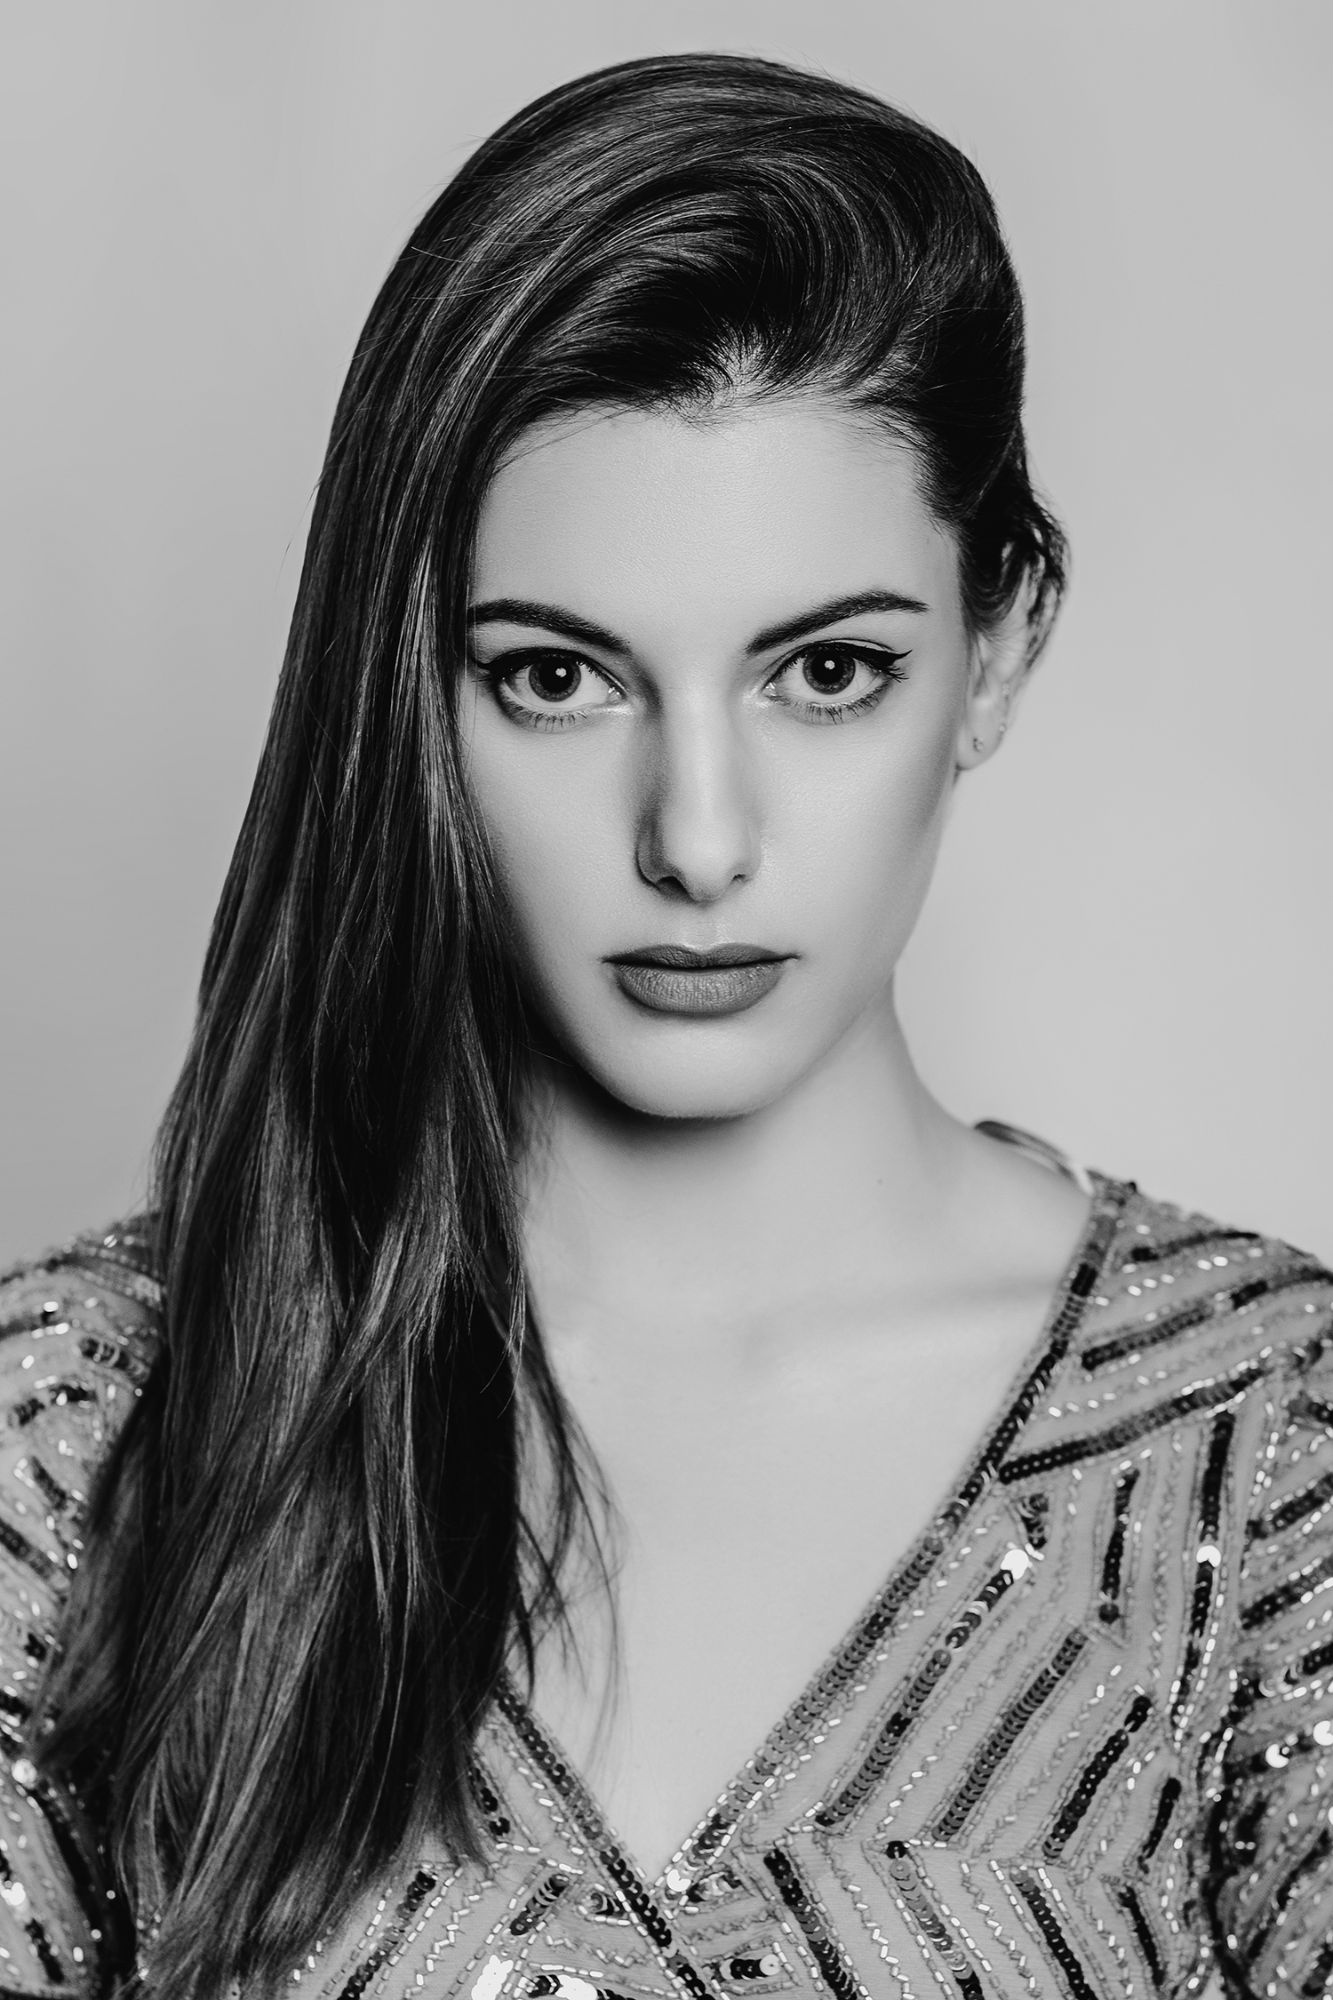 black and white portrait from a model with dark hair